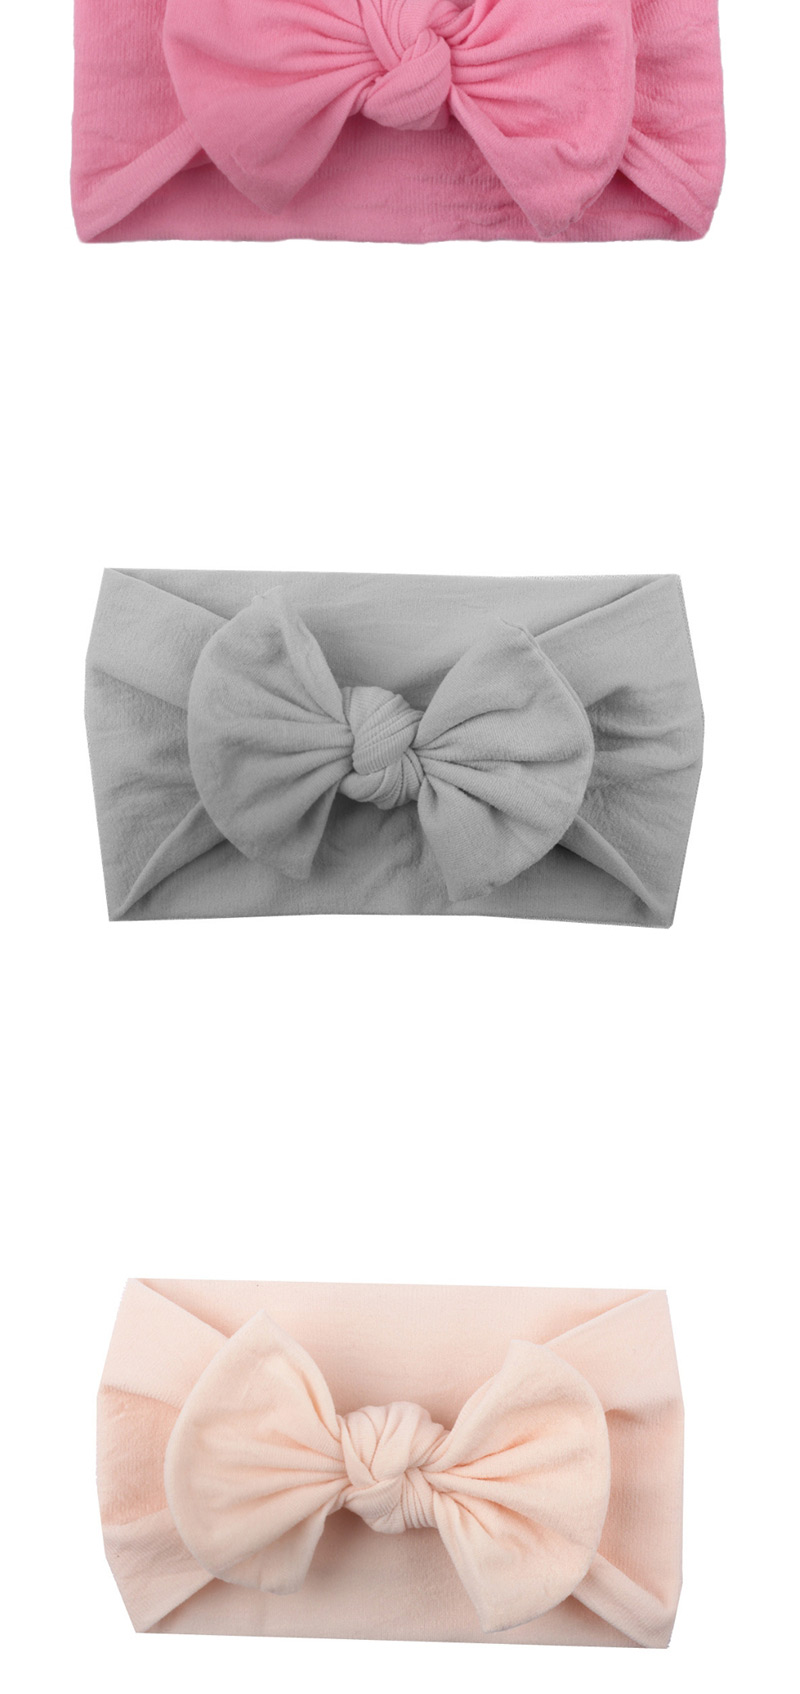 Fashion Meat Meal Nylon Bow Children